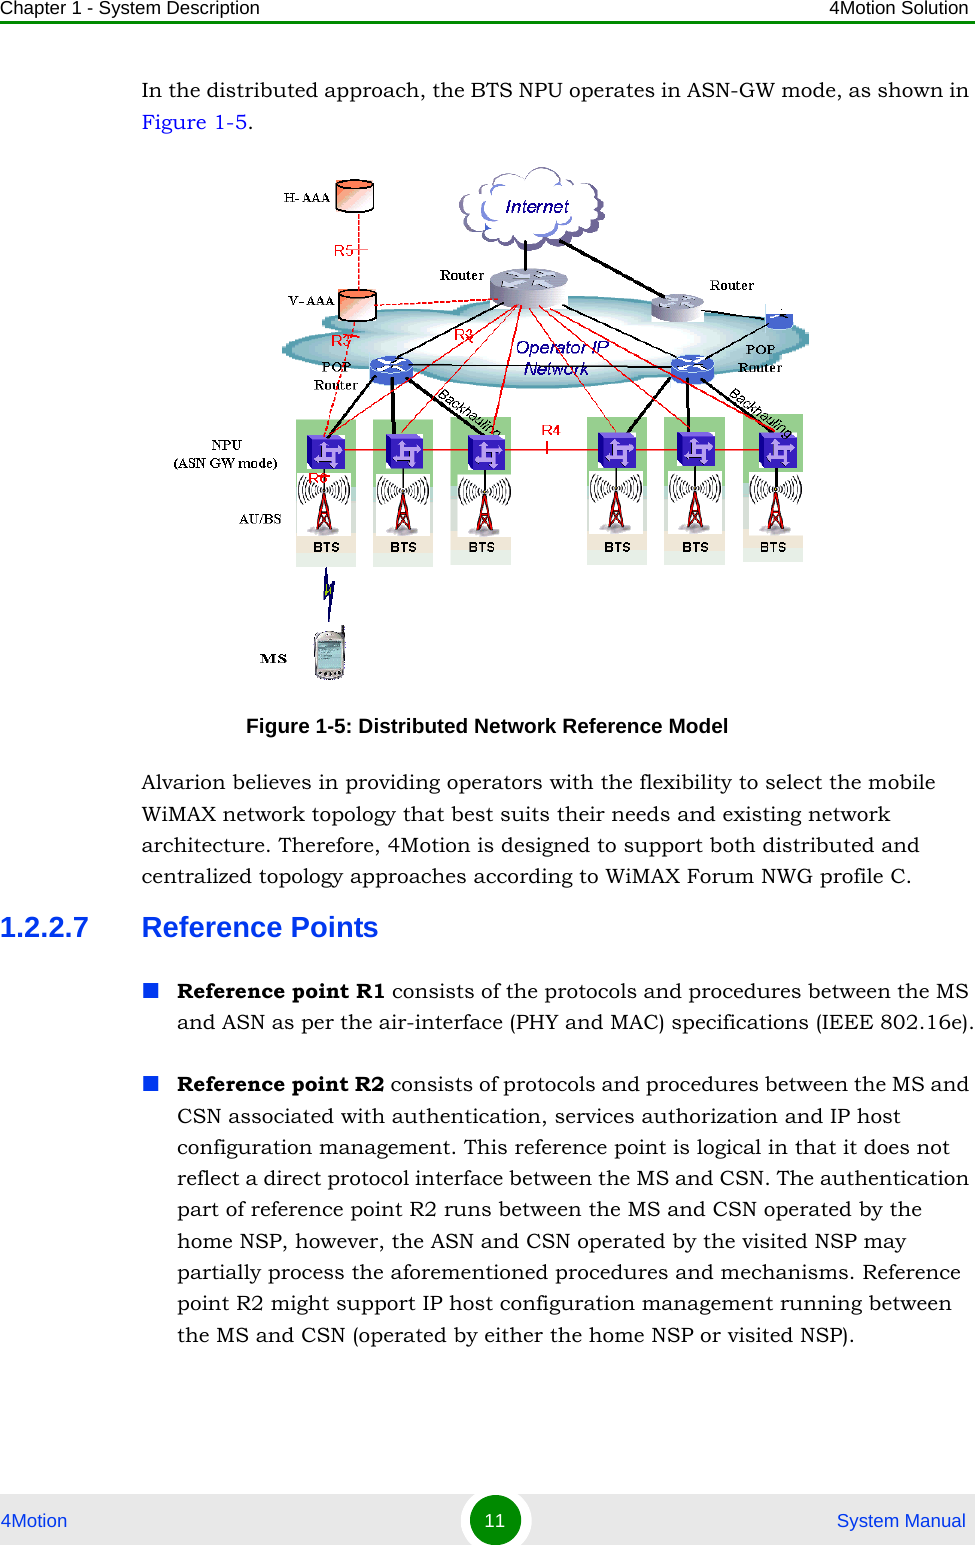 Chapter 1 - System Description 4Motion Solution4Motion 11  System ManualIn the distributed approach, the BTS NPU operates in ASN-GW mode, as shown in Figure 1-5. Alvarion believes in providing operators with the flexibility to select the mobile WiMAX network topology that best suits their needs and existing network architecture. Therefore, 4Motion is designed to support both distributed and centralized topology approaches according to WiMAX Forum NWG profile C.1.2.2.7 Reference PointsReference point R1 consists of the protocols and procedures between the MS and ASN as per the air-interface (PHY and MAC) specifications (IEEE 802.16e).Reference point R2 consists of protocols and procedures between the MS and CSN associated with authentication, services authorization and IP host configuration management. This reference point is logical in that it does not reflect a direct protocol interface between the MS and CSN. The authentication part of reference point R2 runs between the MS and CSN operated by the home NSP, however, the ASN and CSN operated by the visited NSP may partially process the aforementioned procedures and mechanisms. Reference point R2 might support IP host configuration management running between the MS and CSN (operated by either the home NSP or visited NSP).Figure 1-5: Distributed Network Reference Model